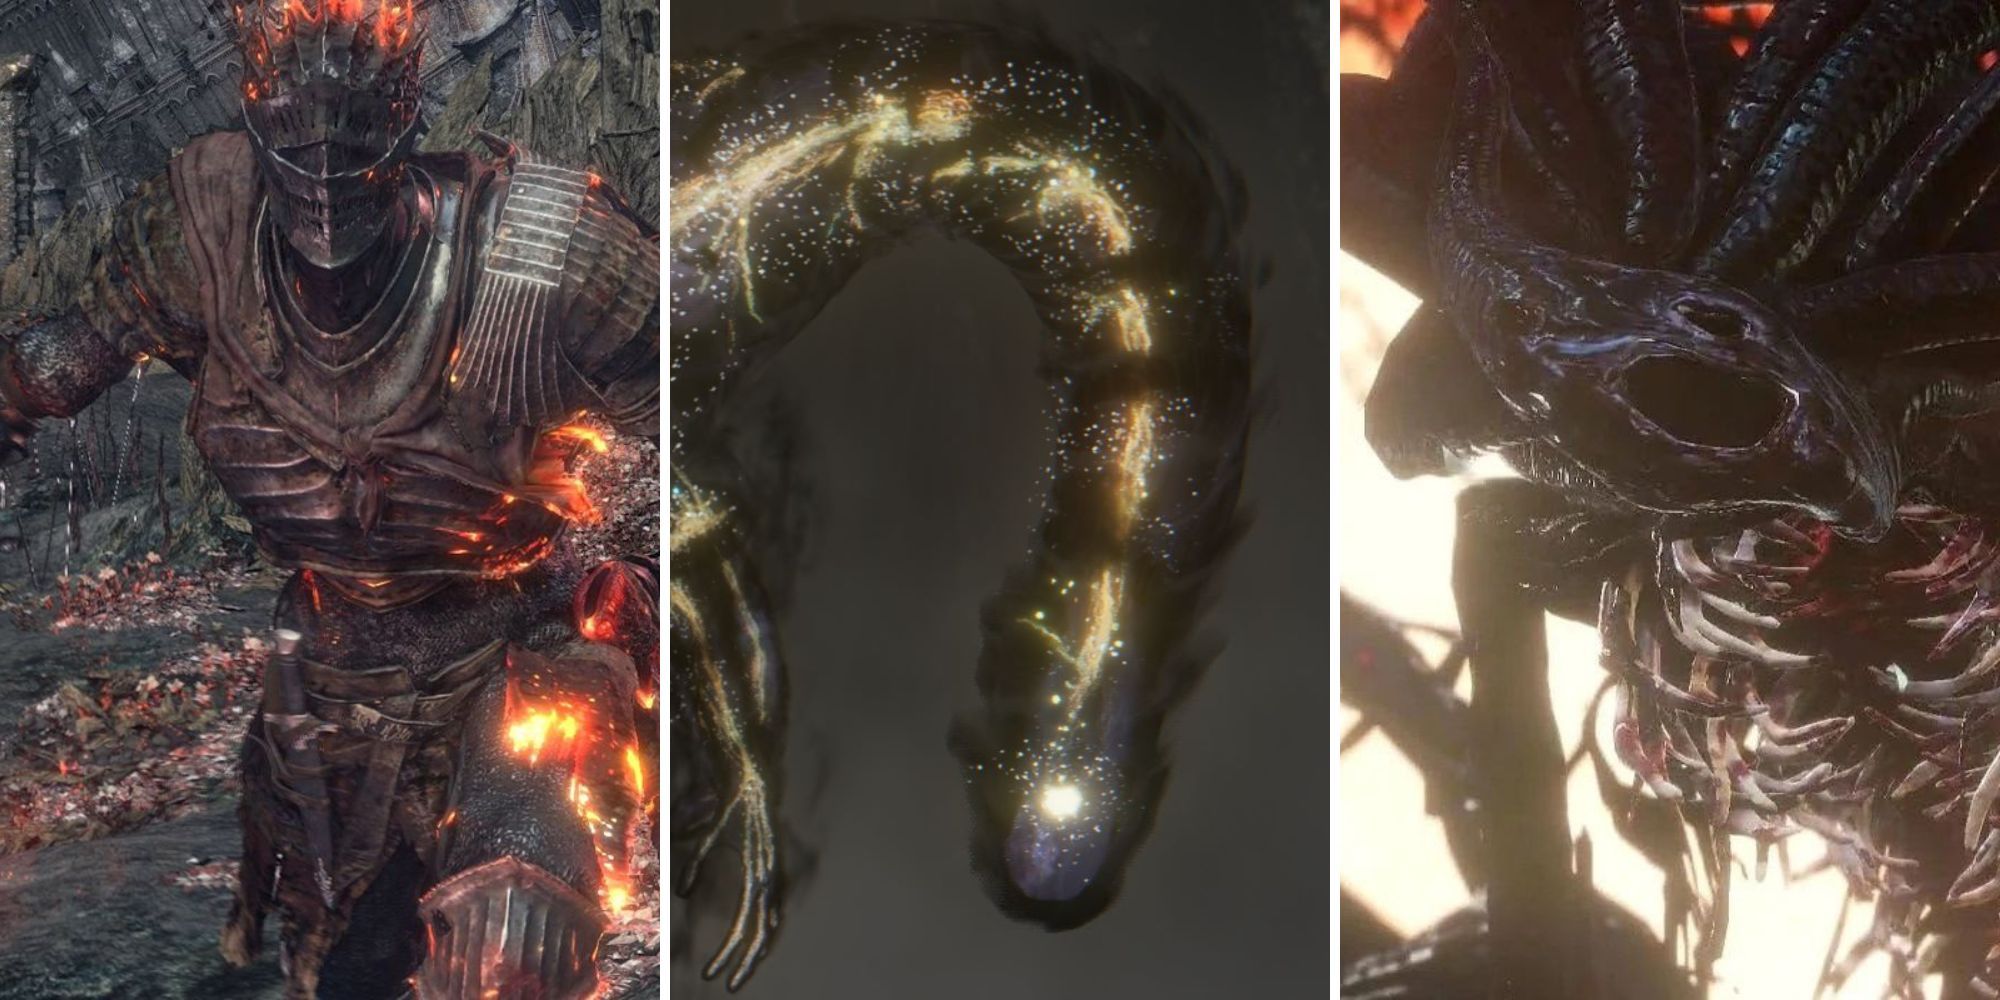 A grid showing the final bosses from the games Dark Souls 3, Elden Ring, and Bloodborne